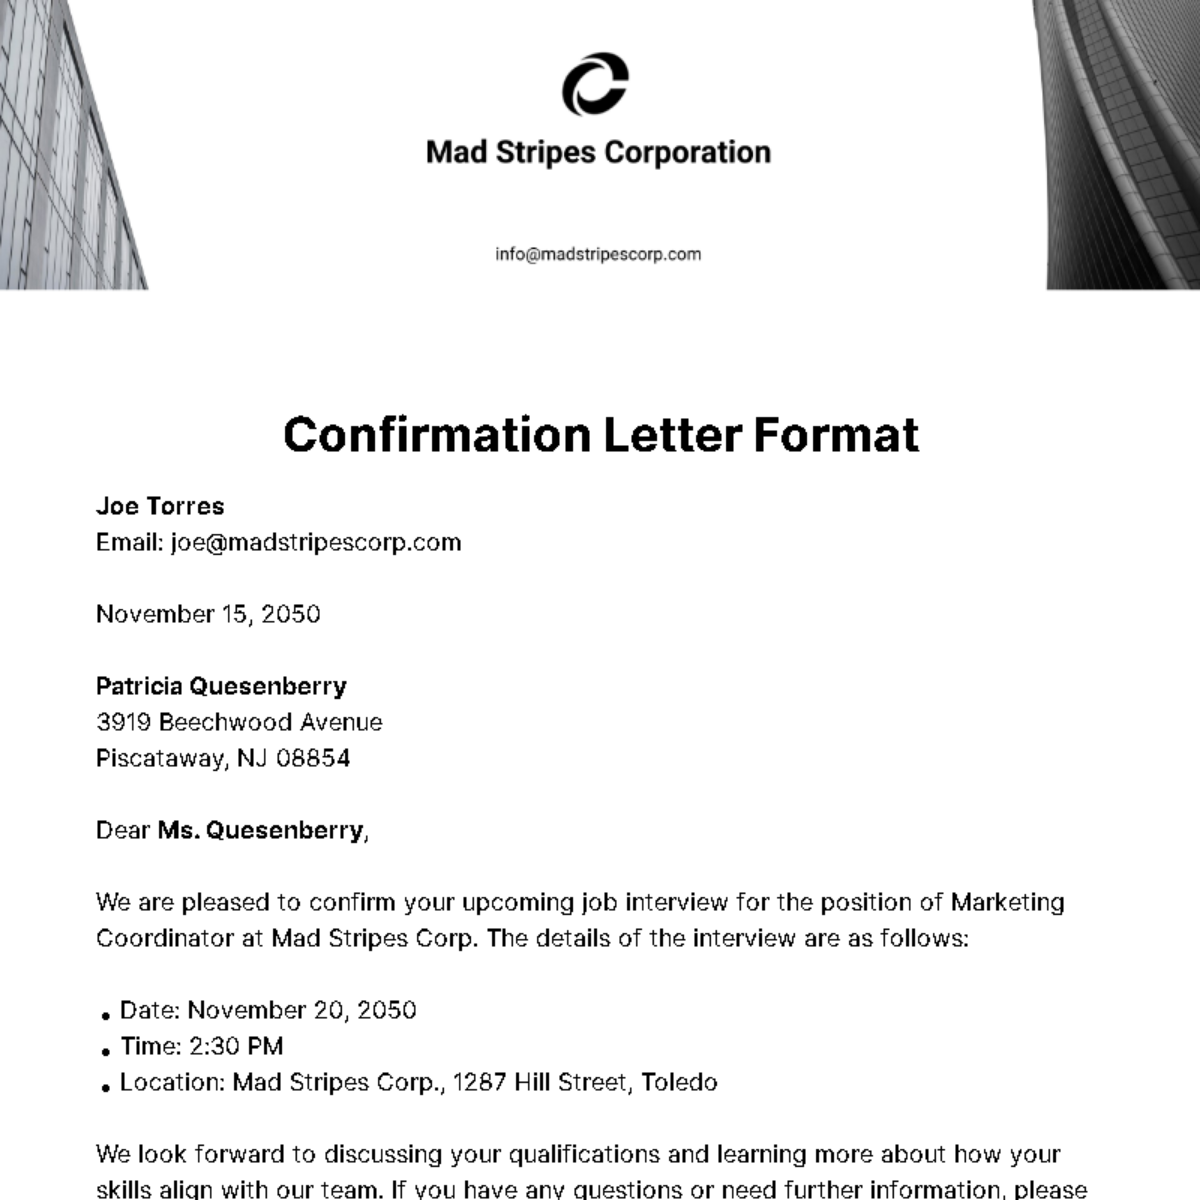 Confirmation Letter Format Template